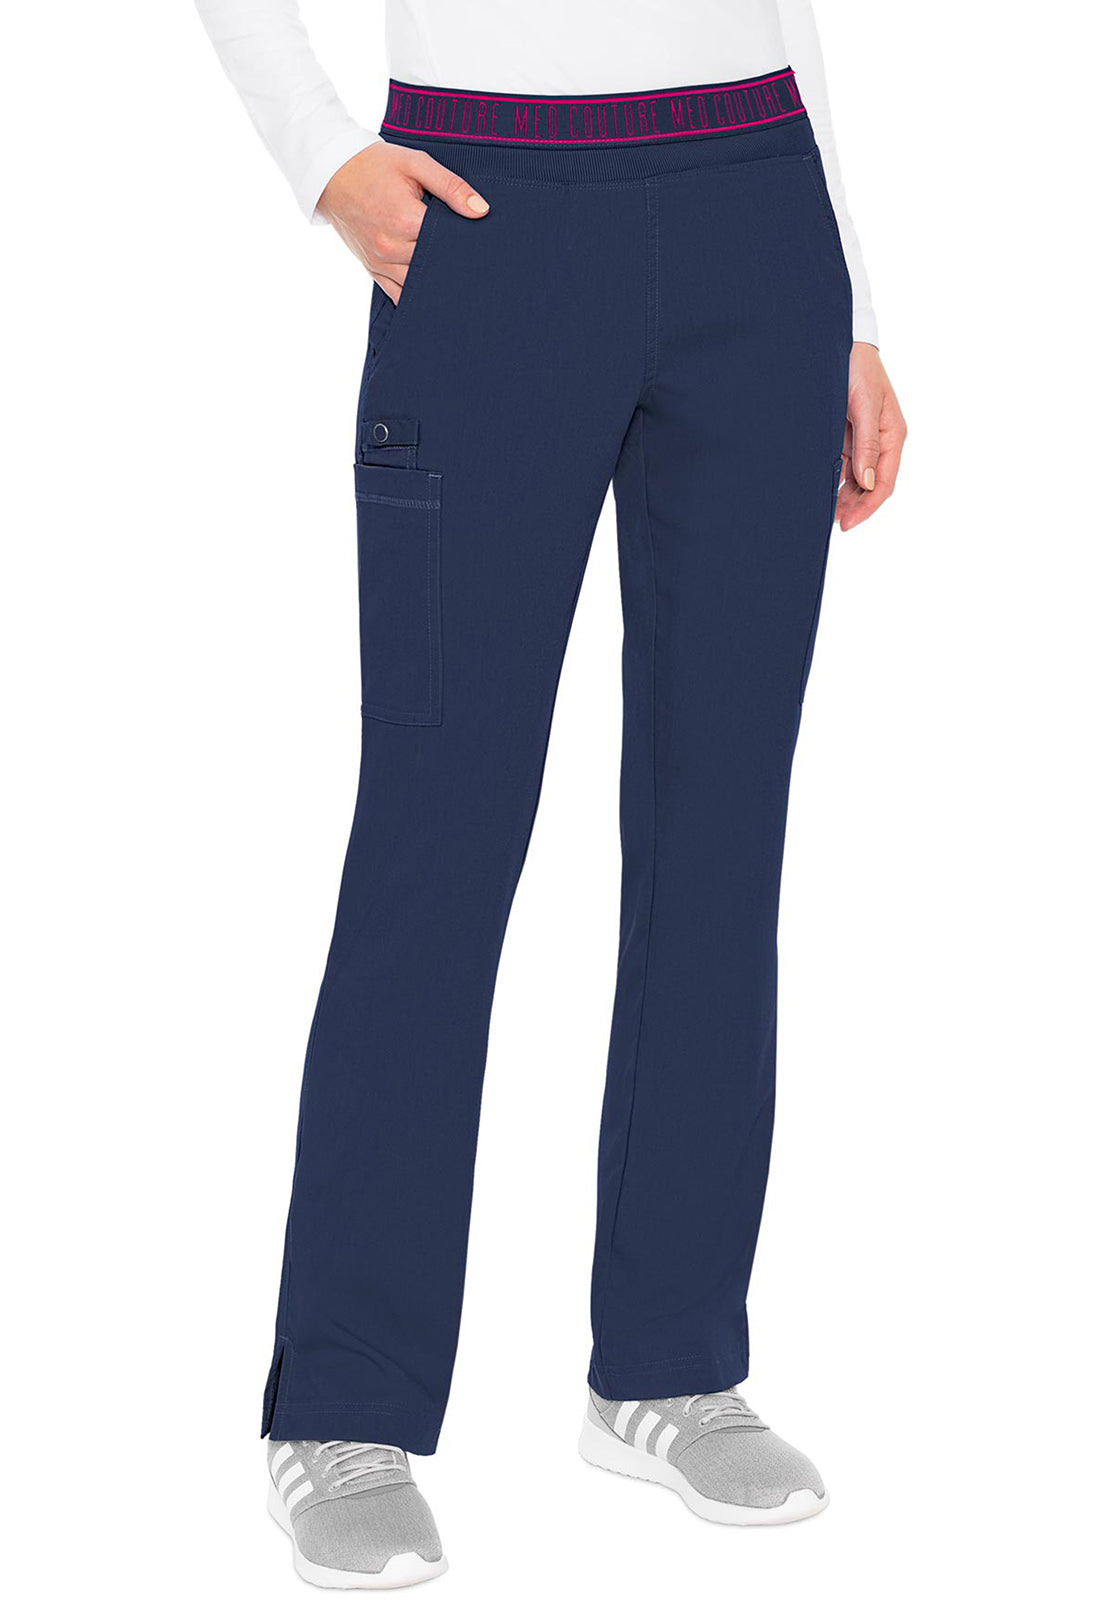 Med Couture Touch Yoga 2 Cargo Pants